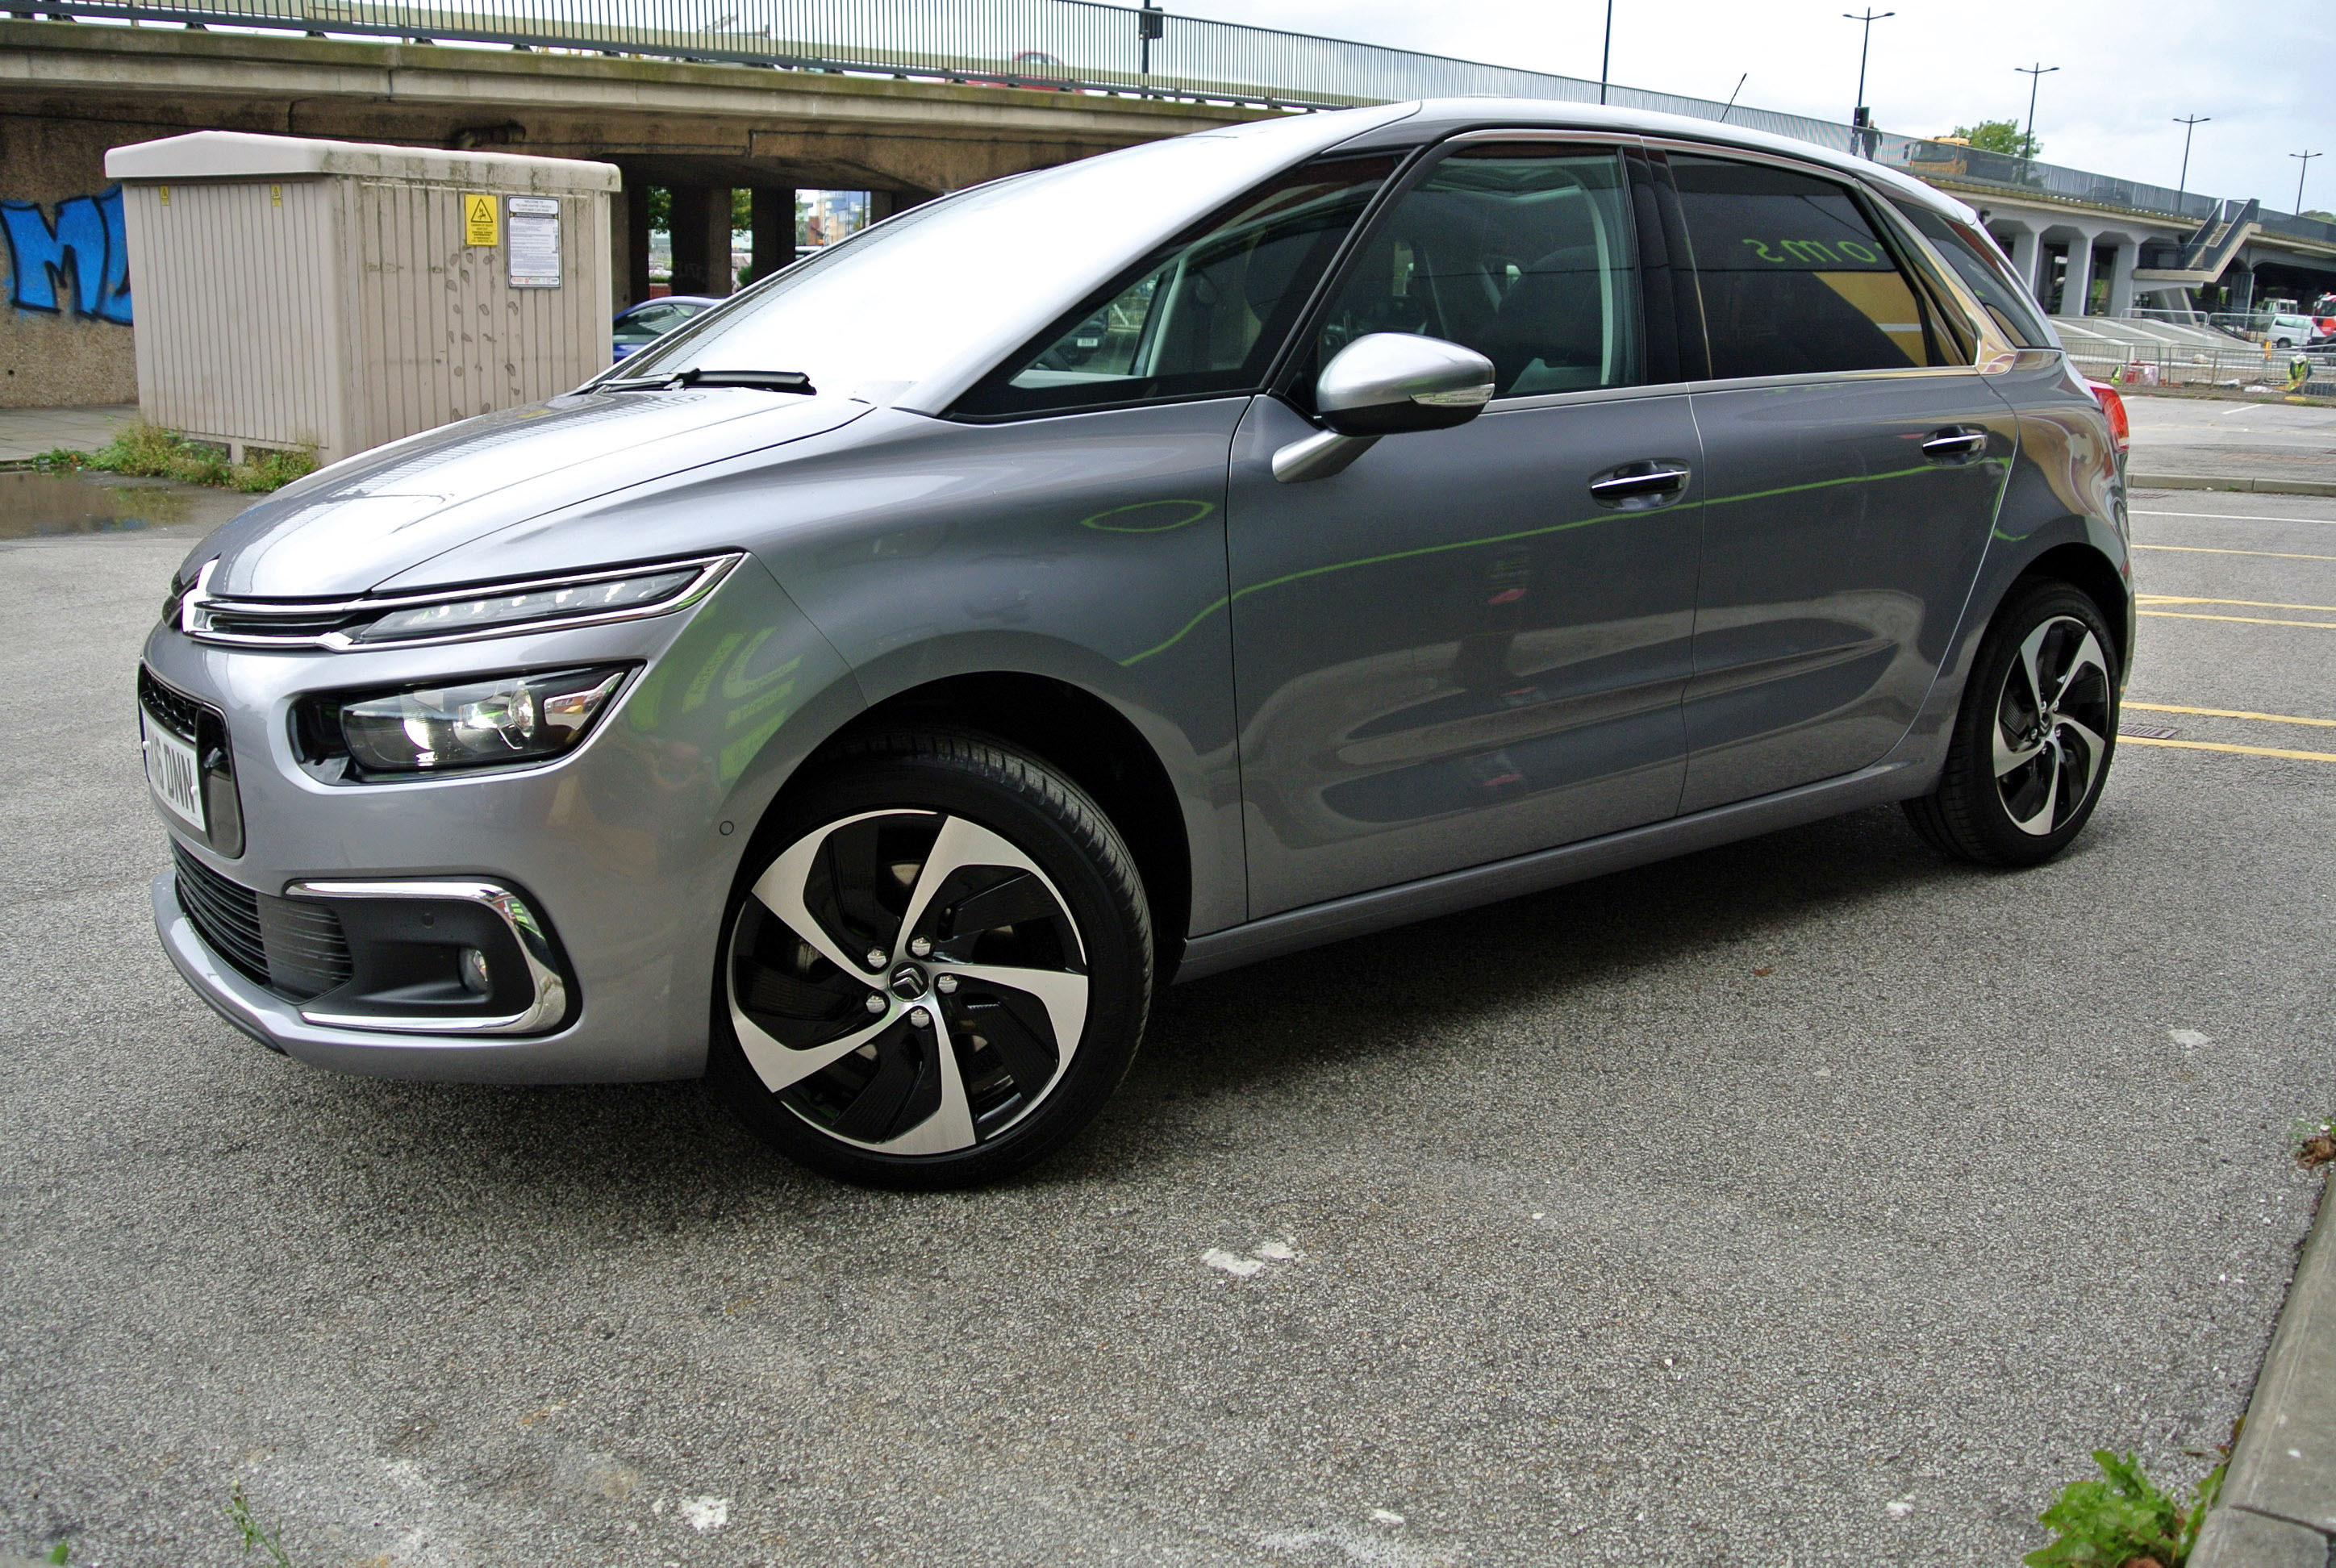 MPV still has a secure place with Citroen Picasso